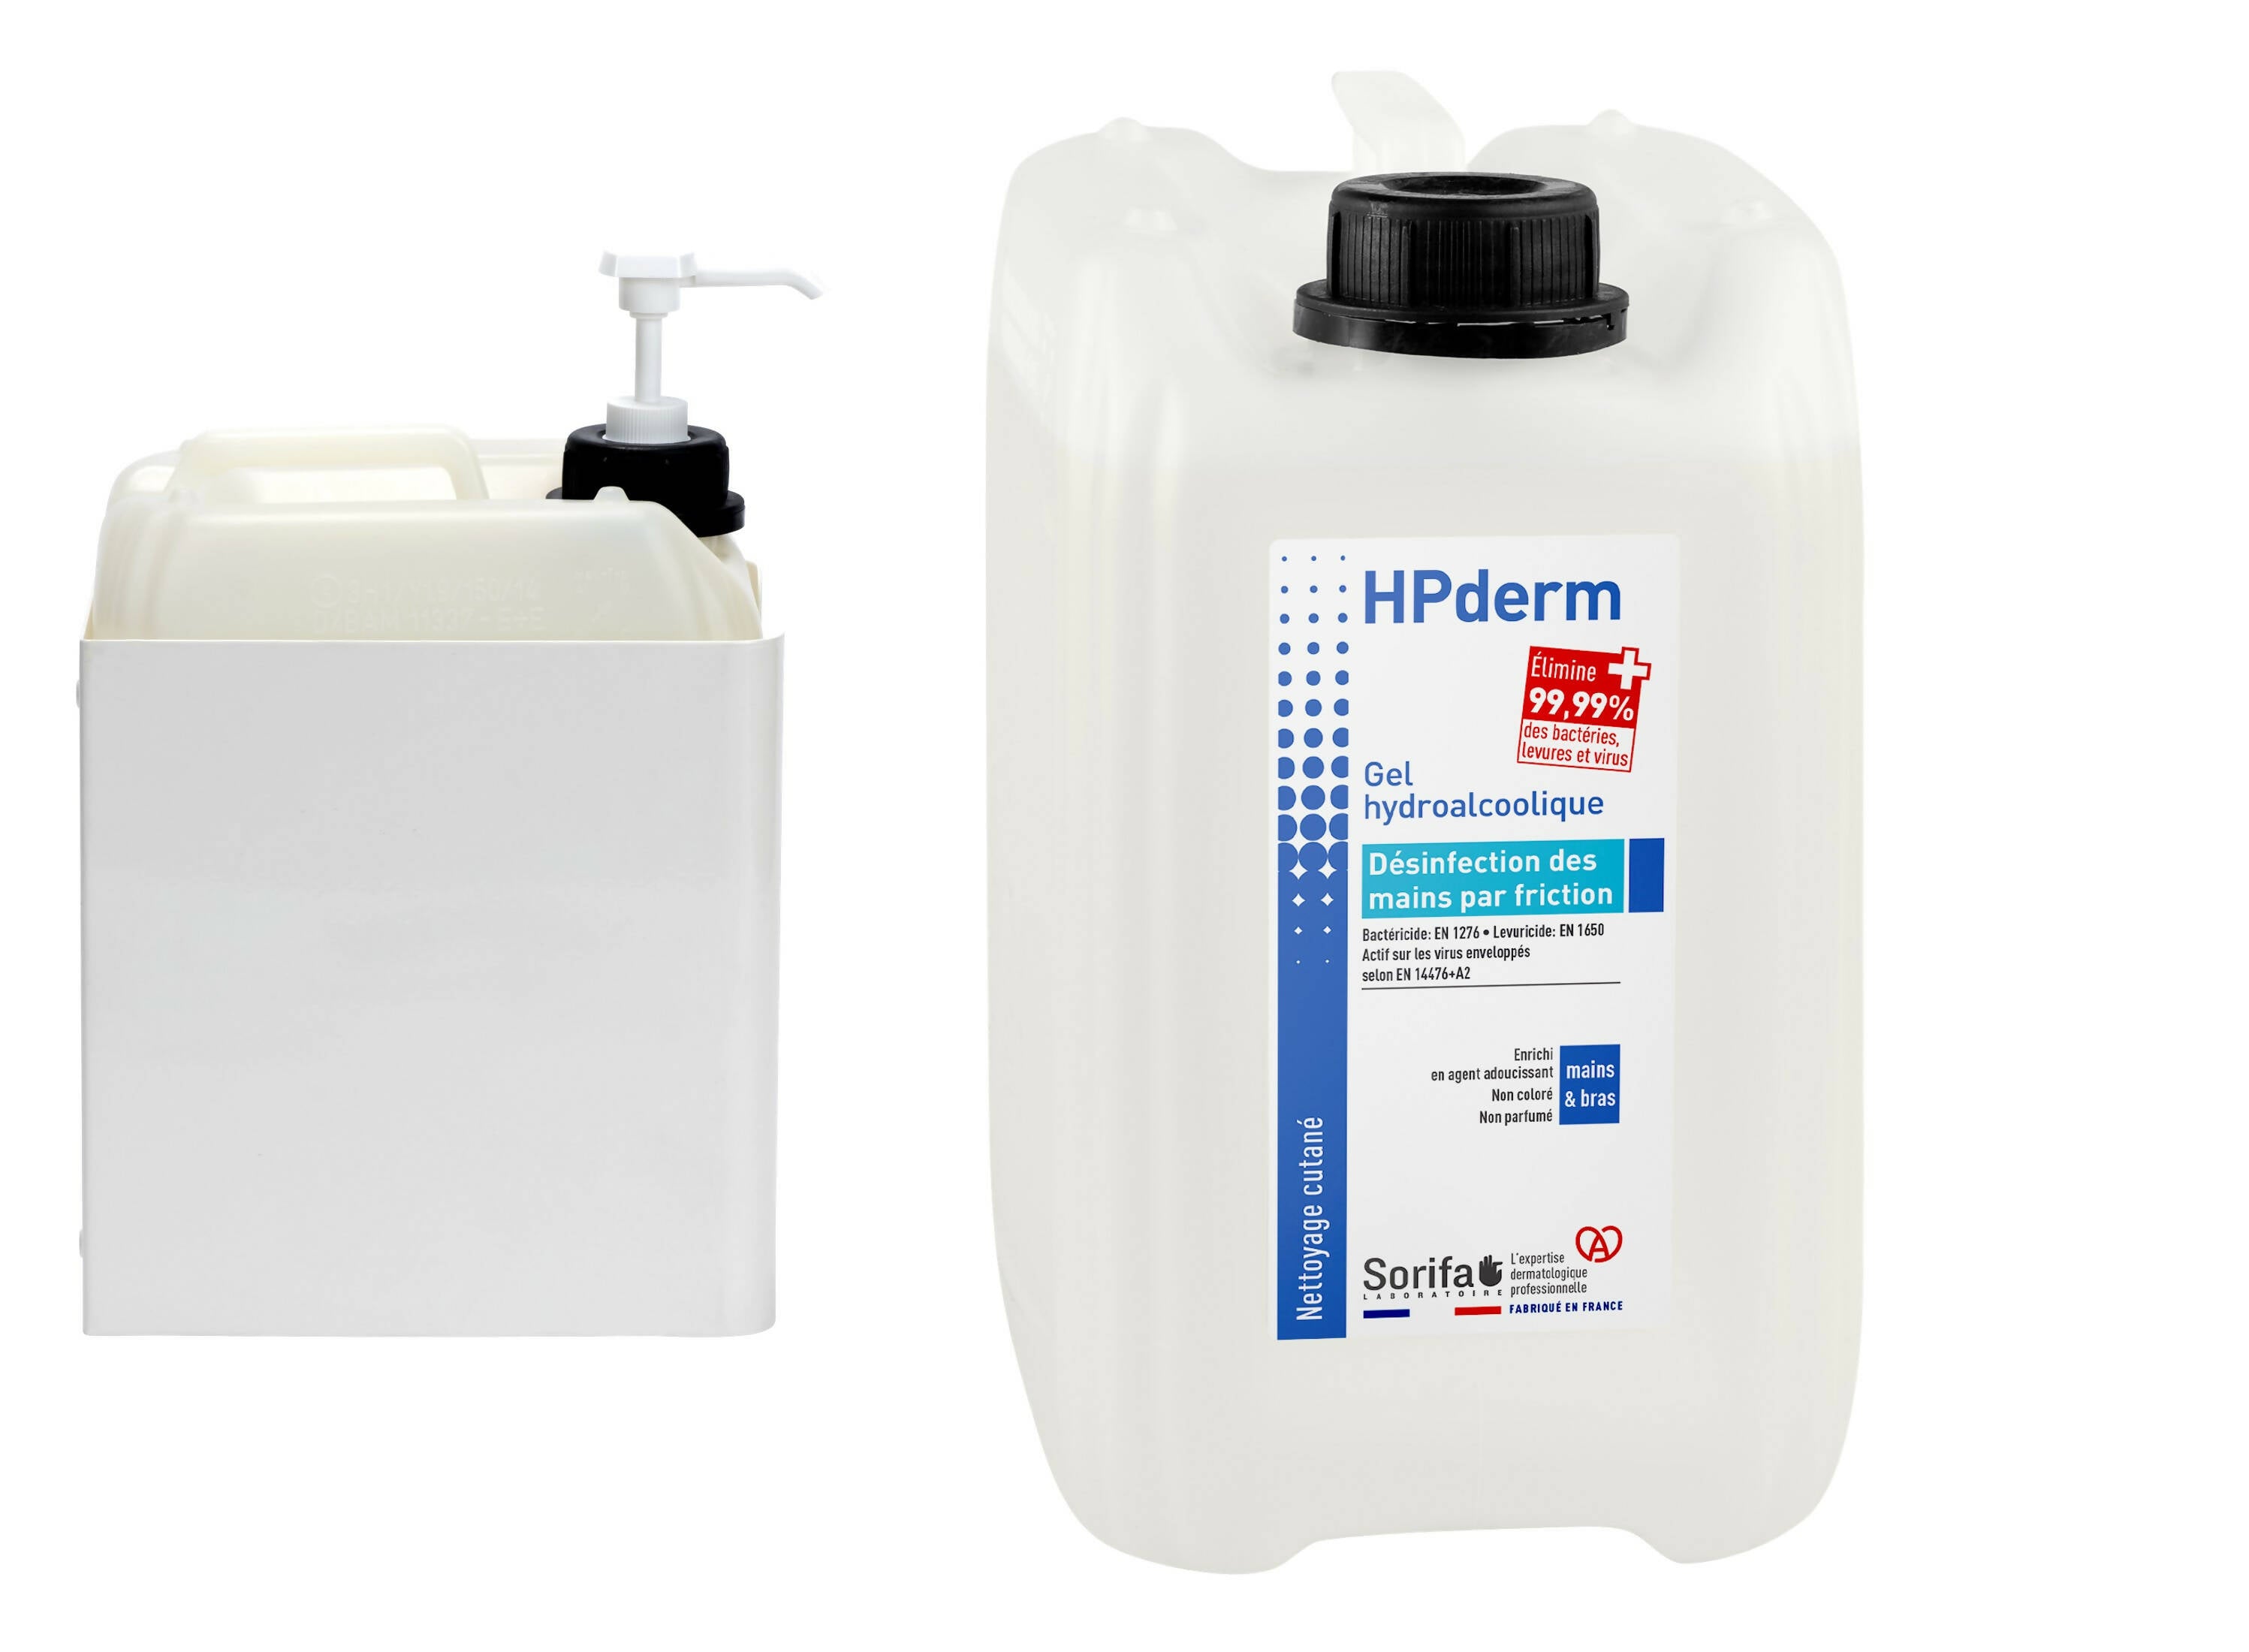 SORIFA – HPderm Hydroalcoholic gel - Hand disinfection by friction - Hands, arms - Enriched with glycerin - Fragrance-free - 5L can - 0